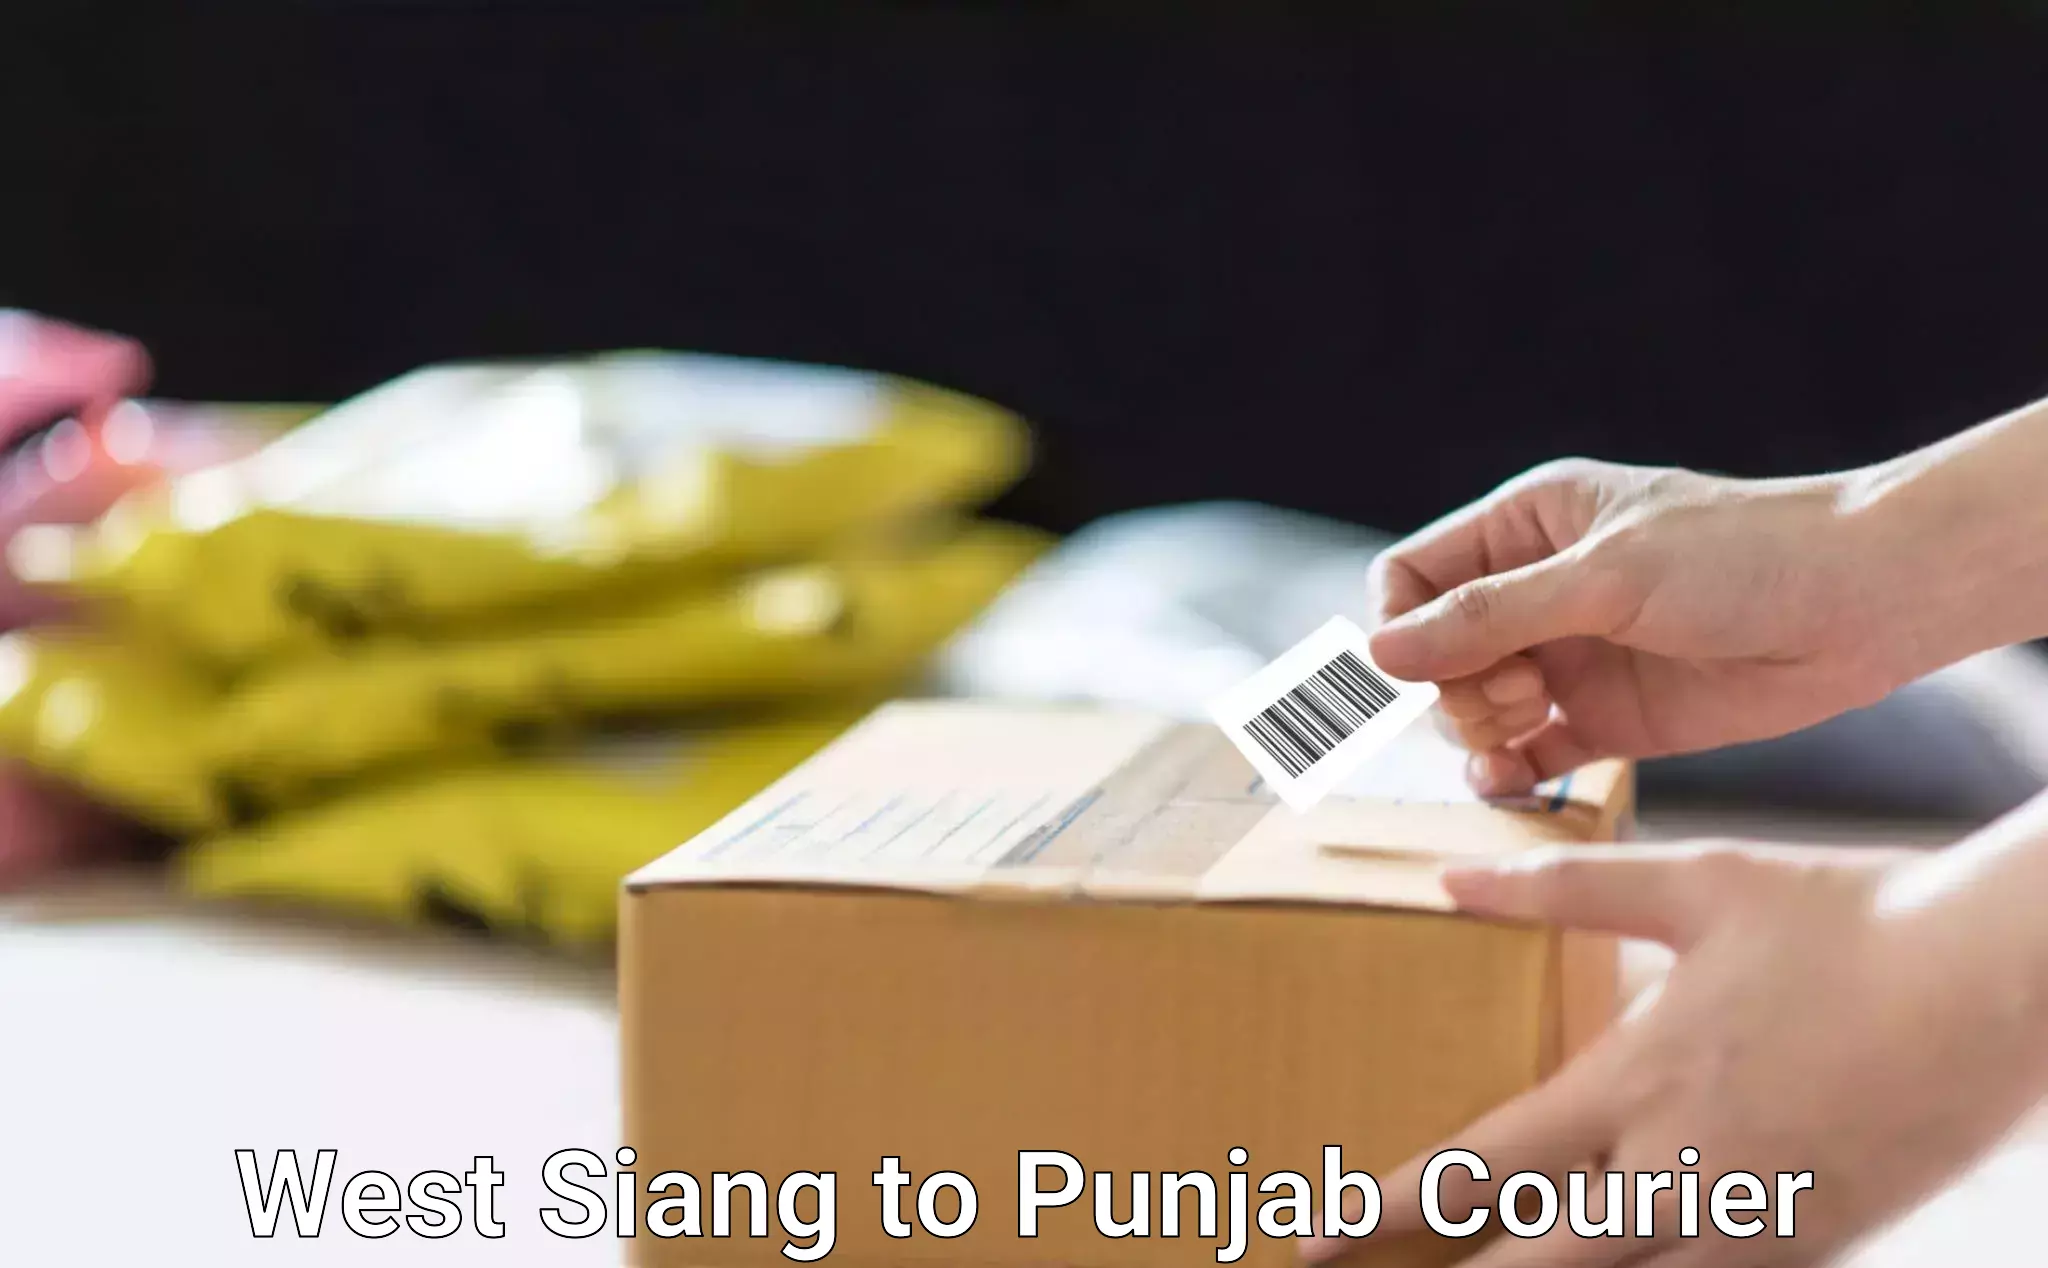 Advanced delivery network West Siang to Punjab